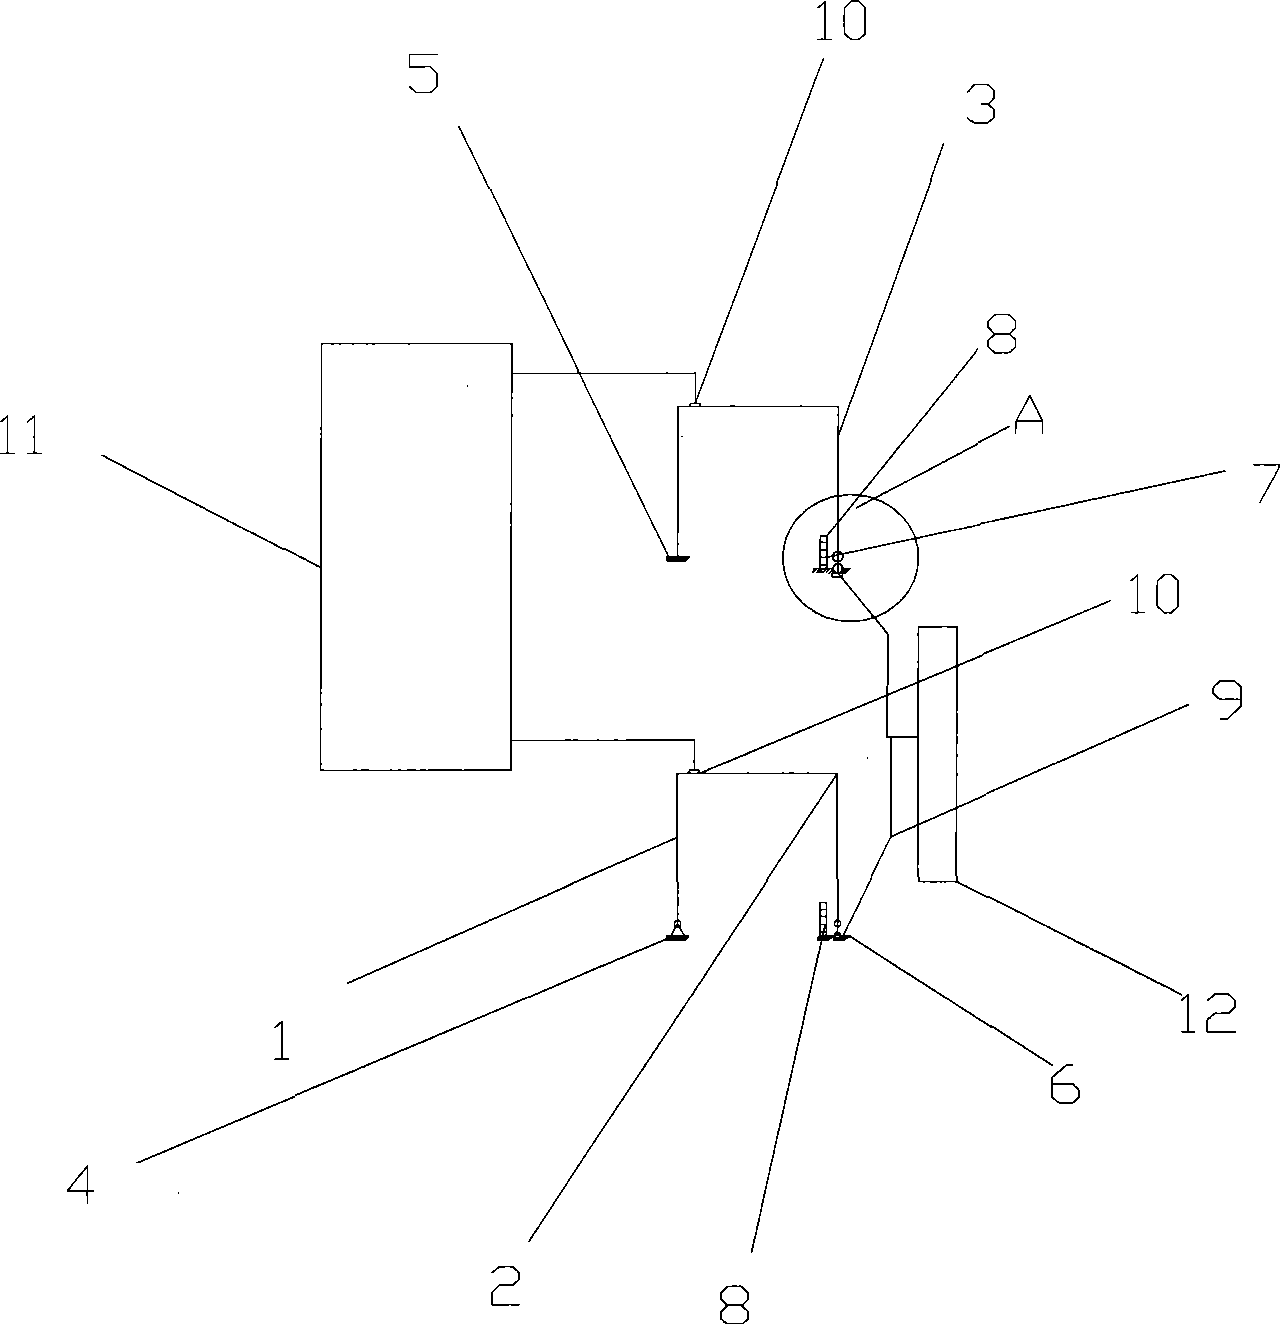 Experimental device for comparing internal force properties of static and hyperstatic structures